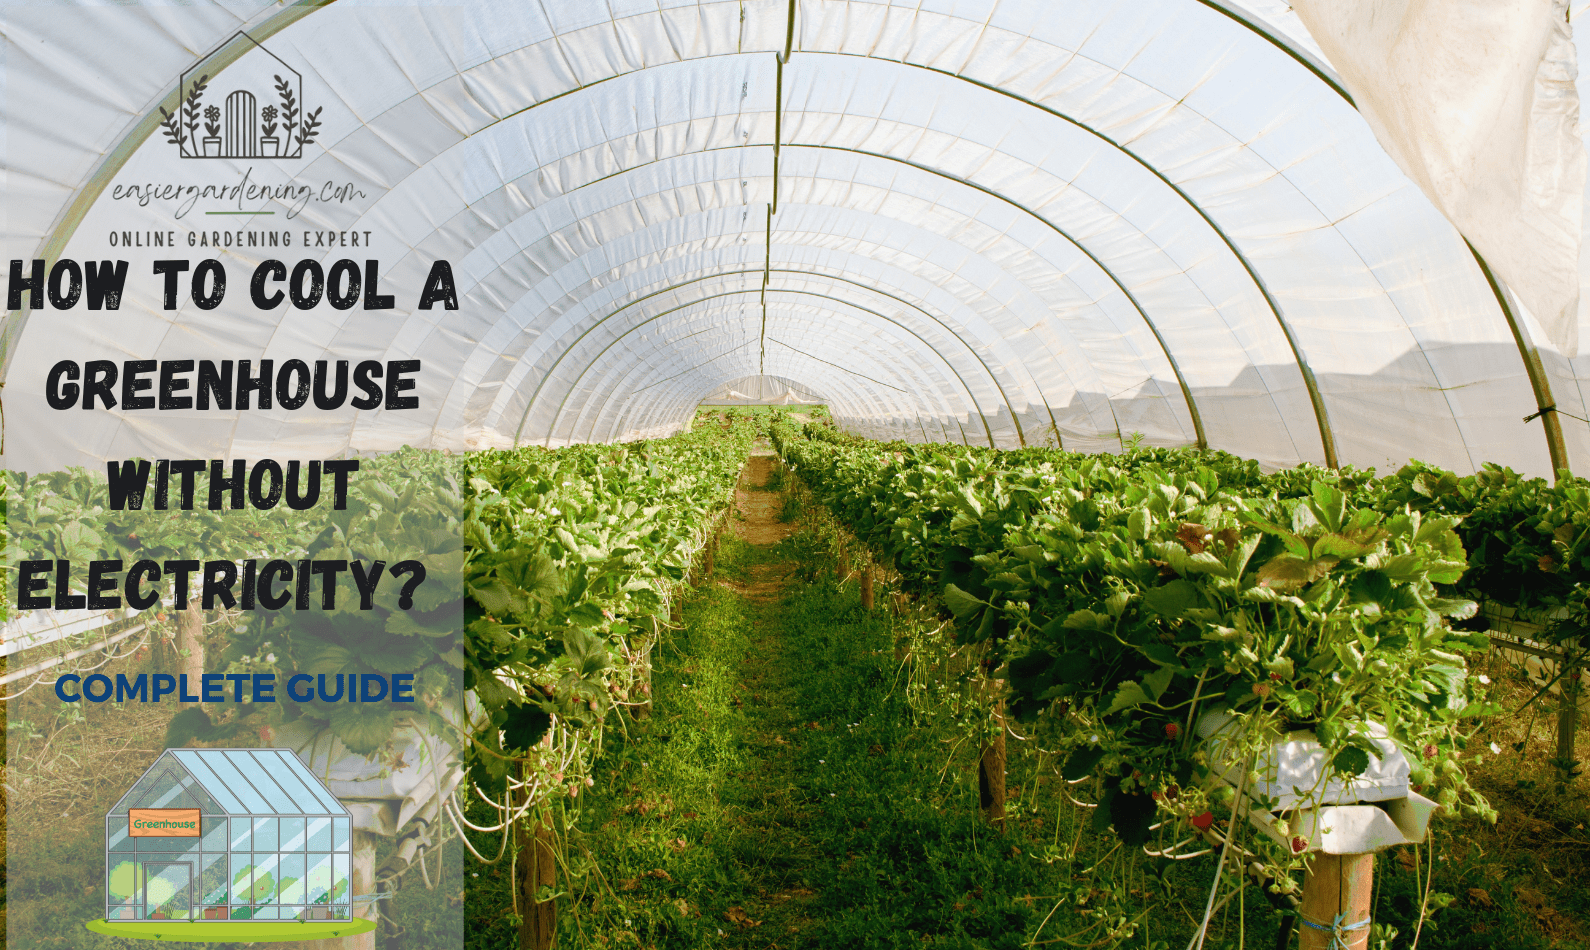 How to Cool a Greenhouse without Electricity?